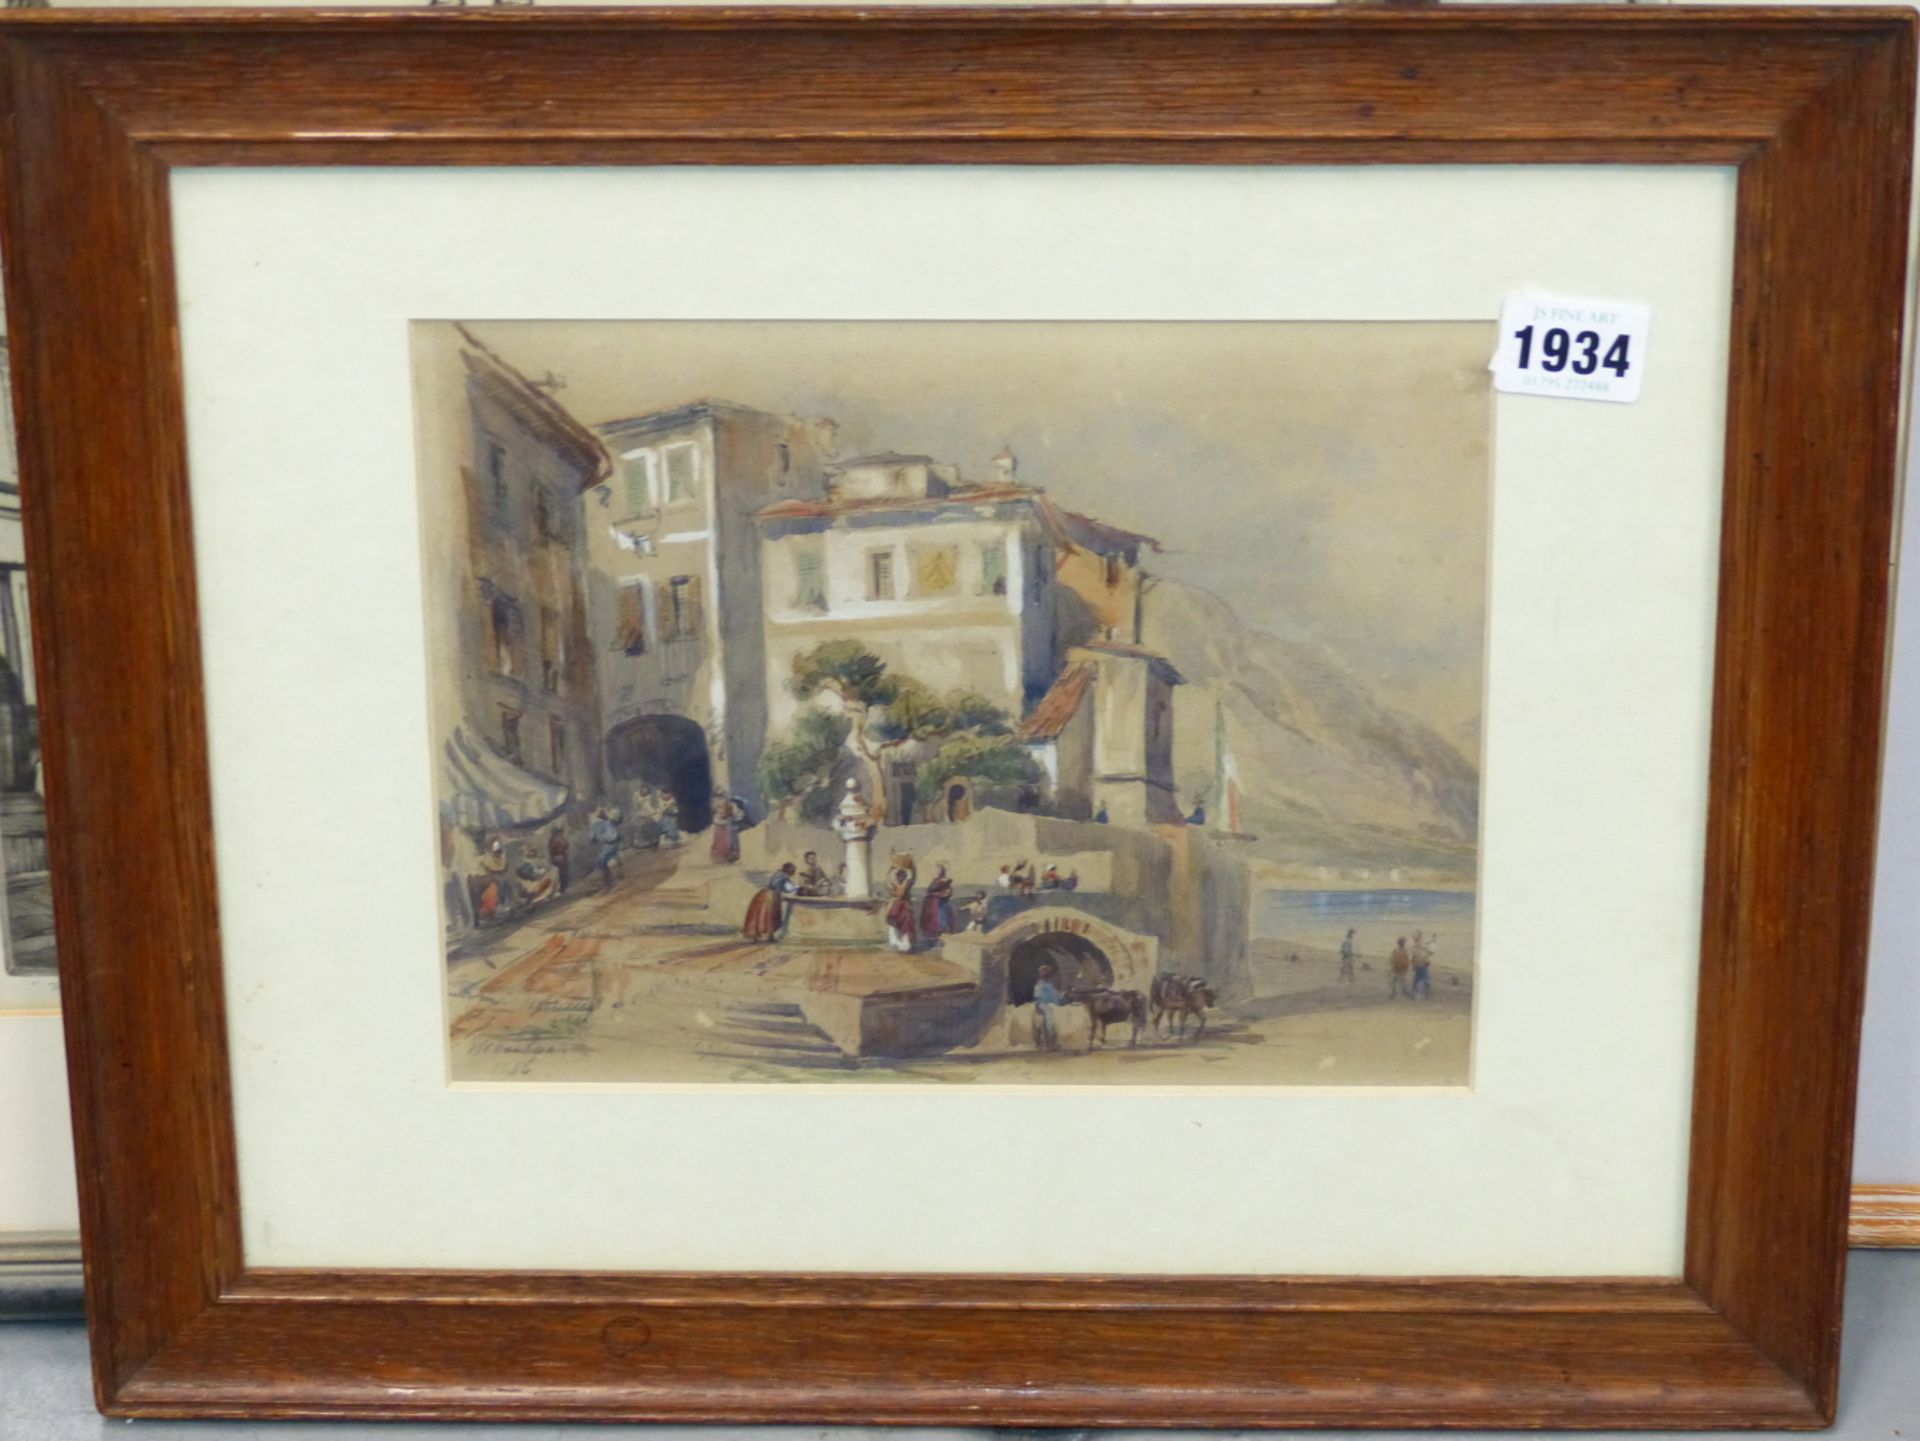 CONTINENTAL SCHOOL, 19THC. ITALIAN COASTAL VILLAGE VIEW IN THE MANNER OF EMMANUEL COSTA. - Image 2 of 3